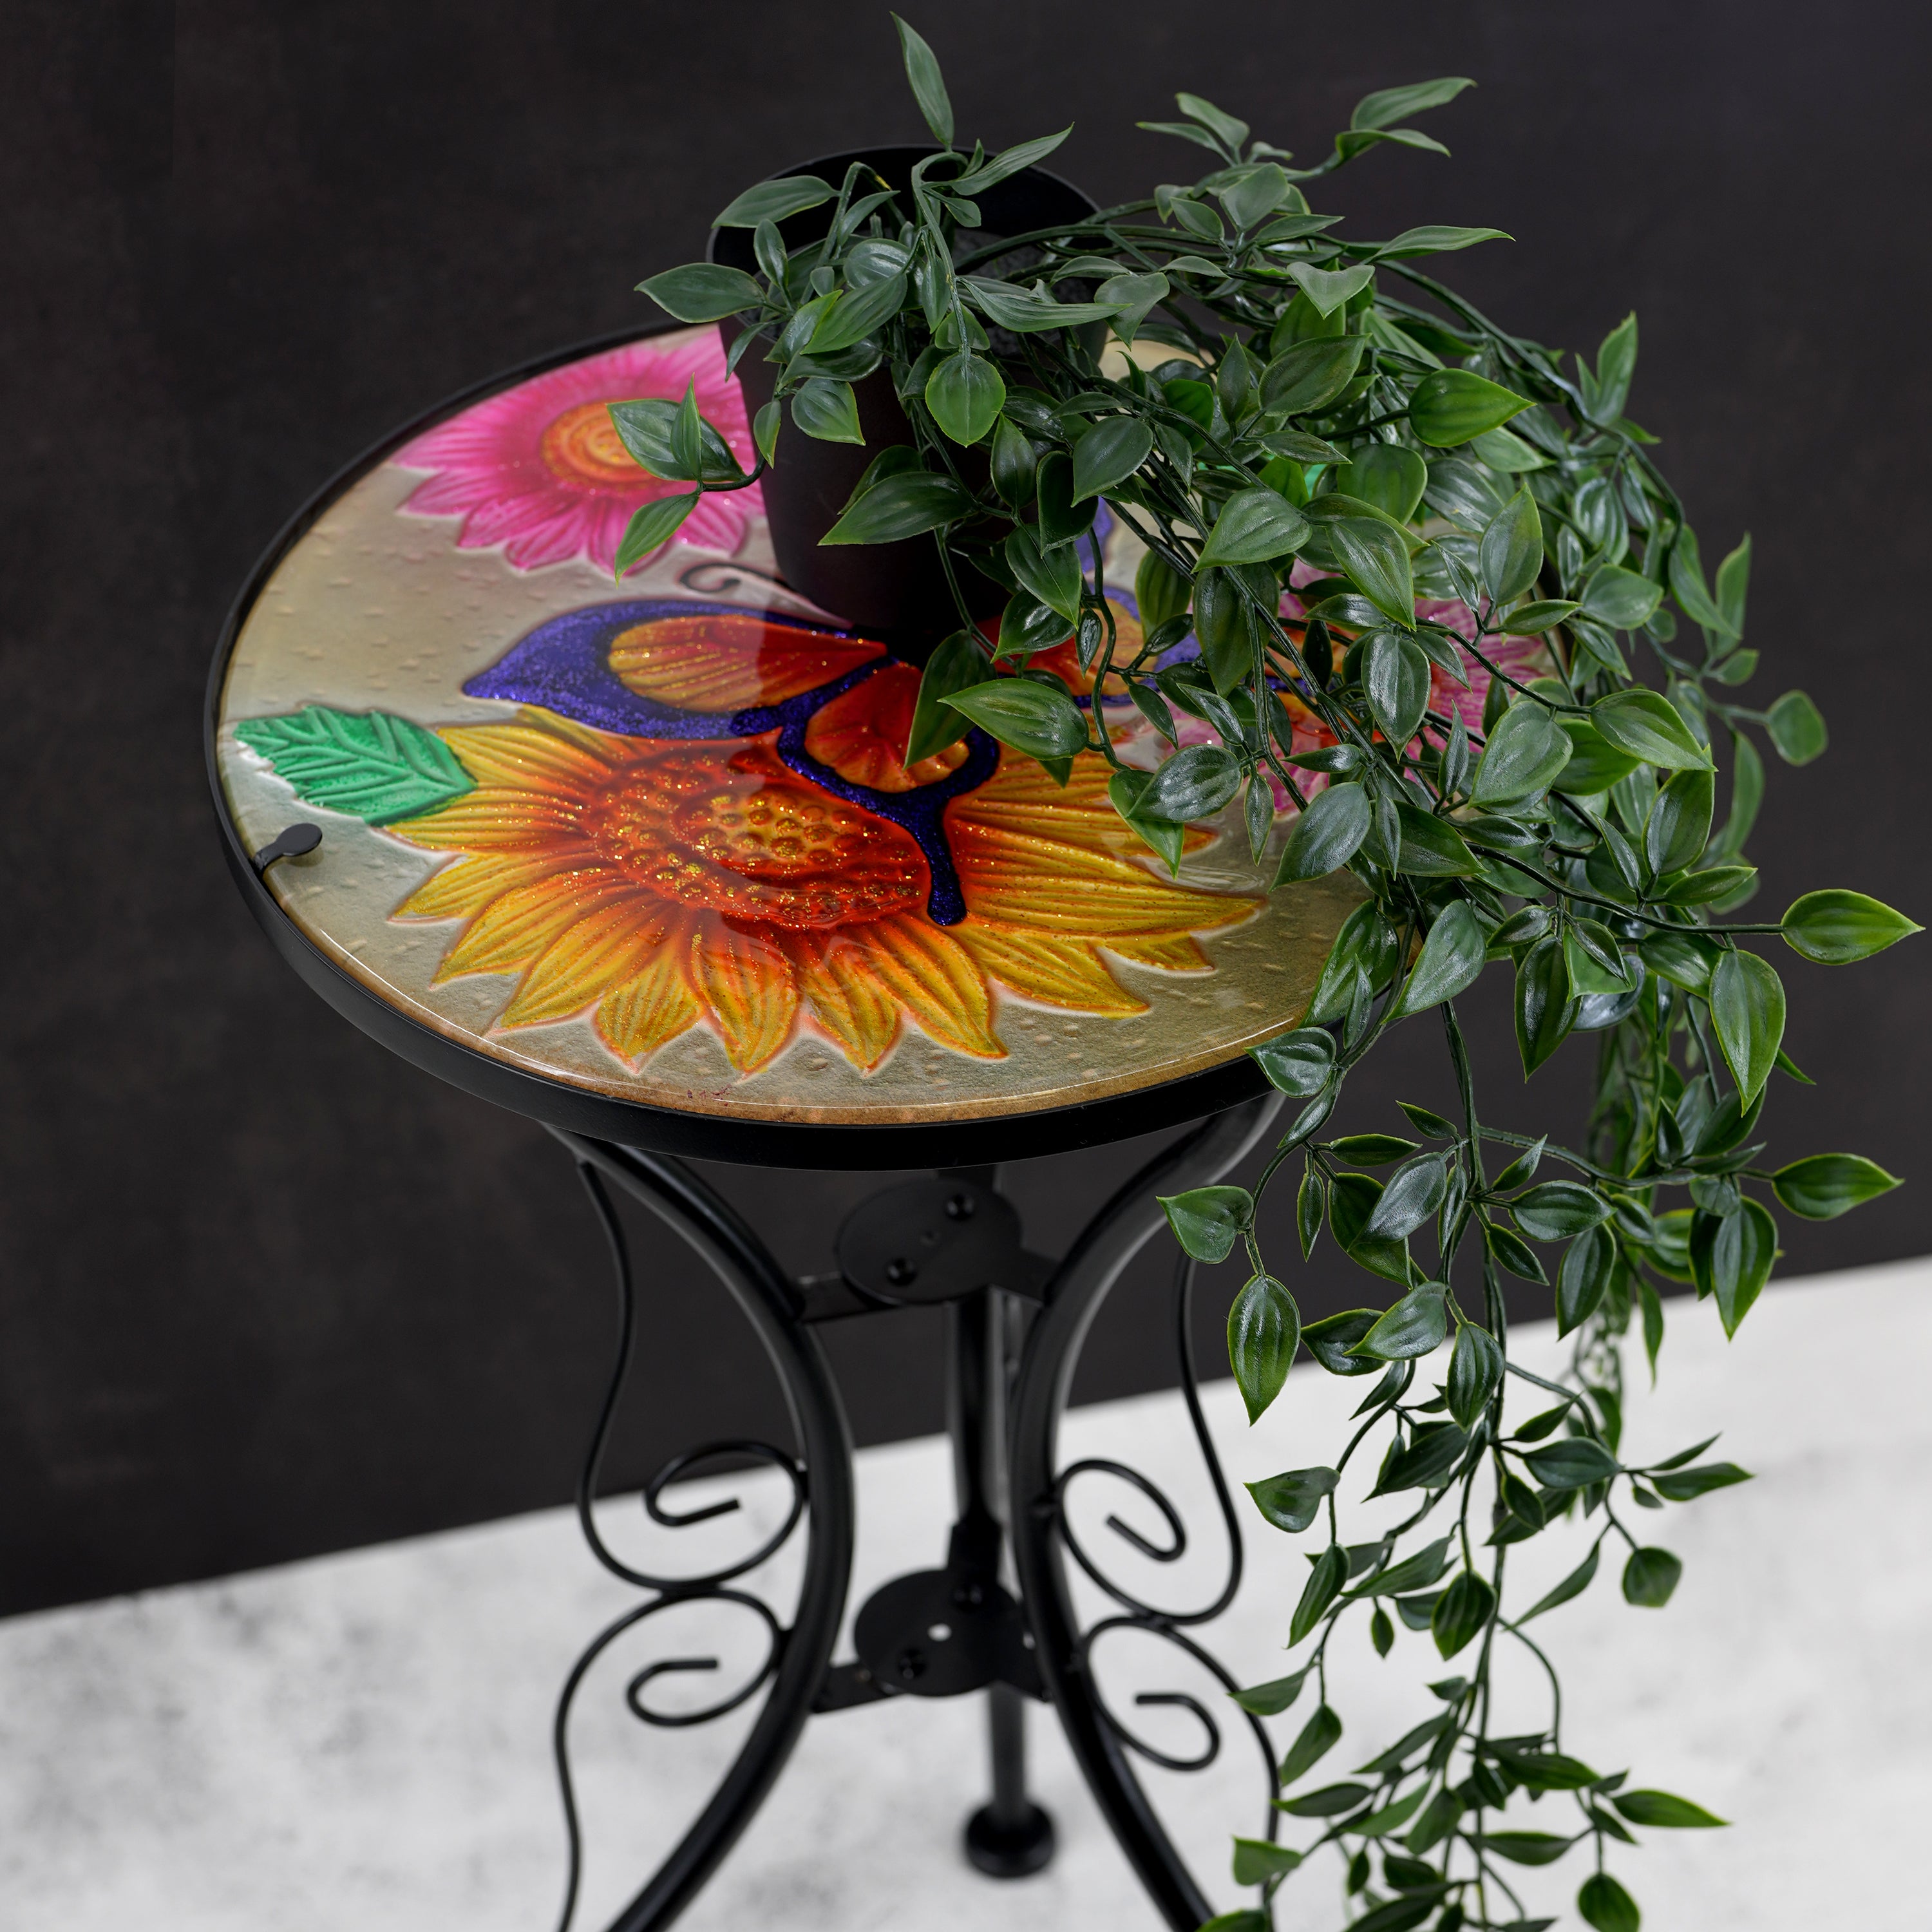 Round Side Garden Mosaic Table With Flowers and Butterfly Design GEEZY - The Magic Toy Shop